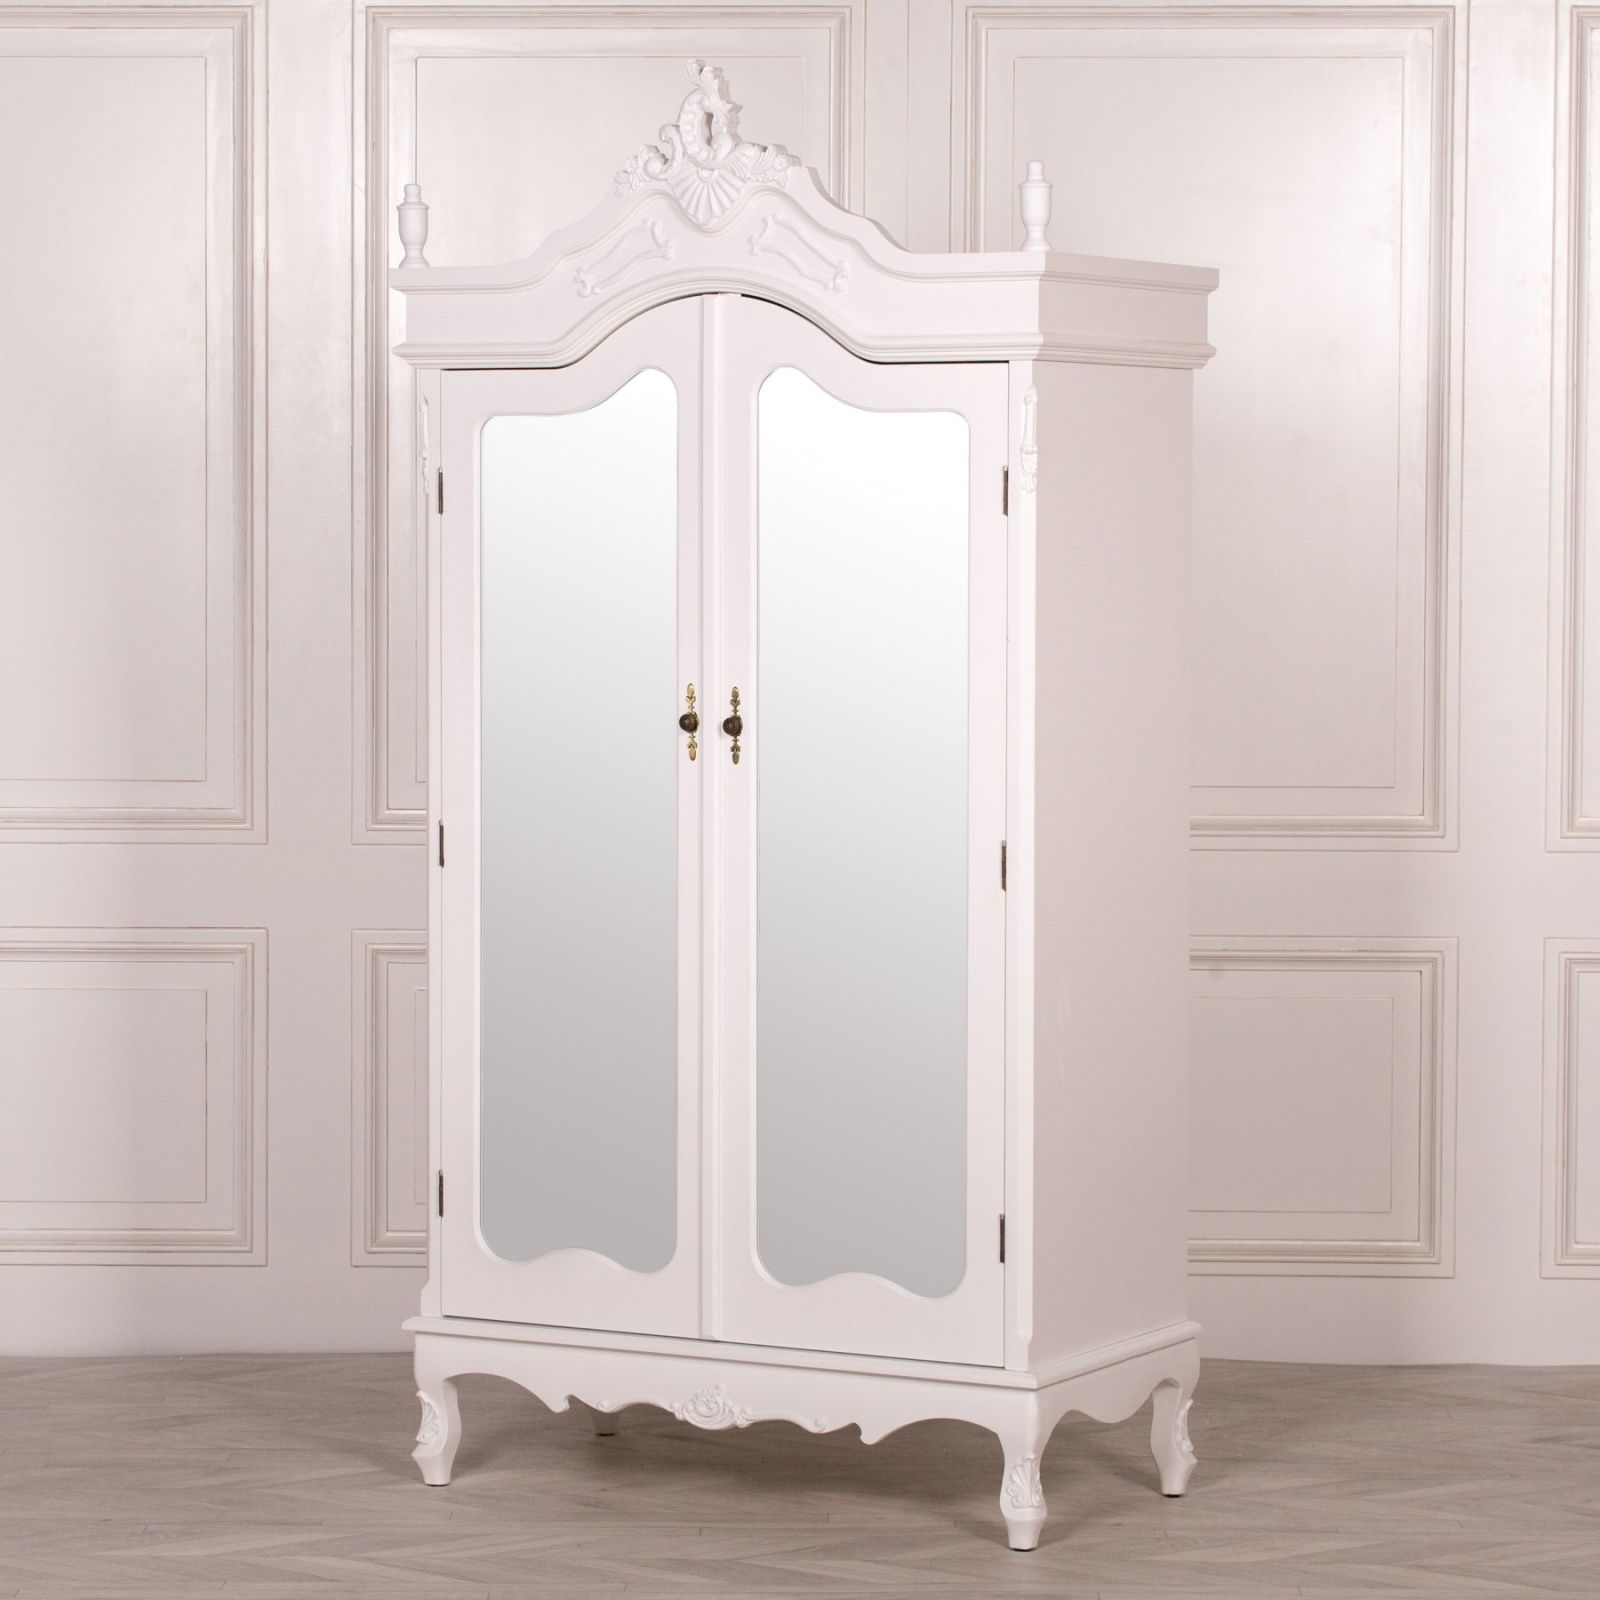 French Style Wardrobe White Mirrored Double Armoire Inside Chic Wardrobes (View 12 of 20)